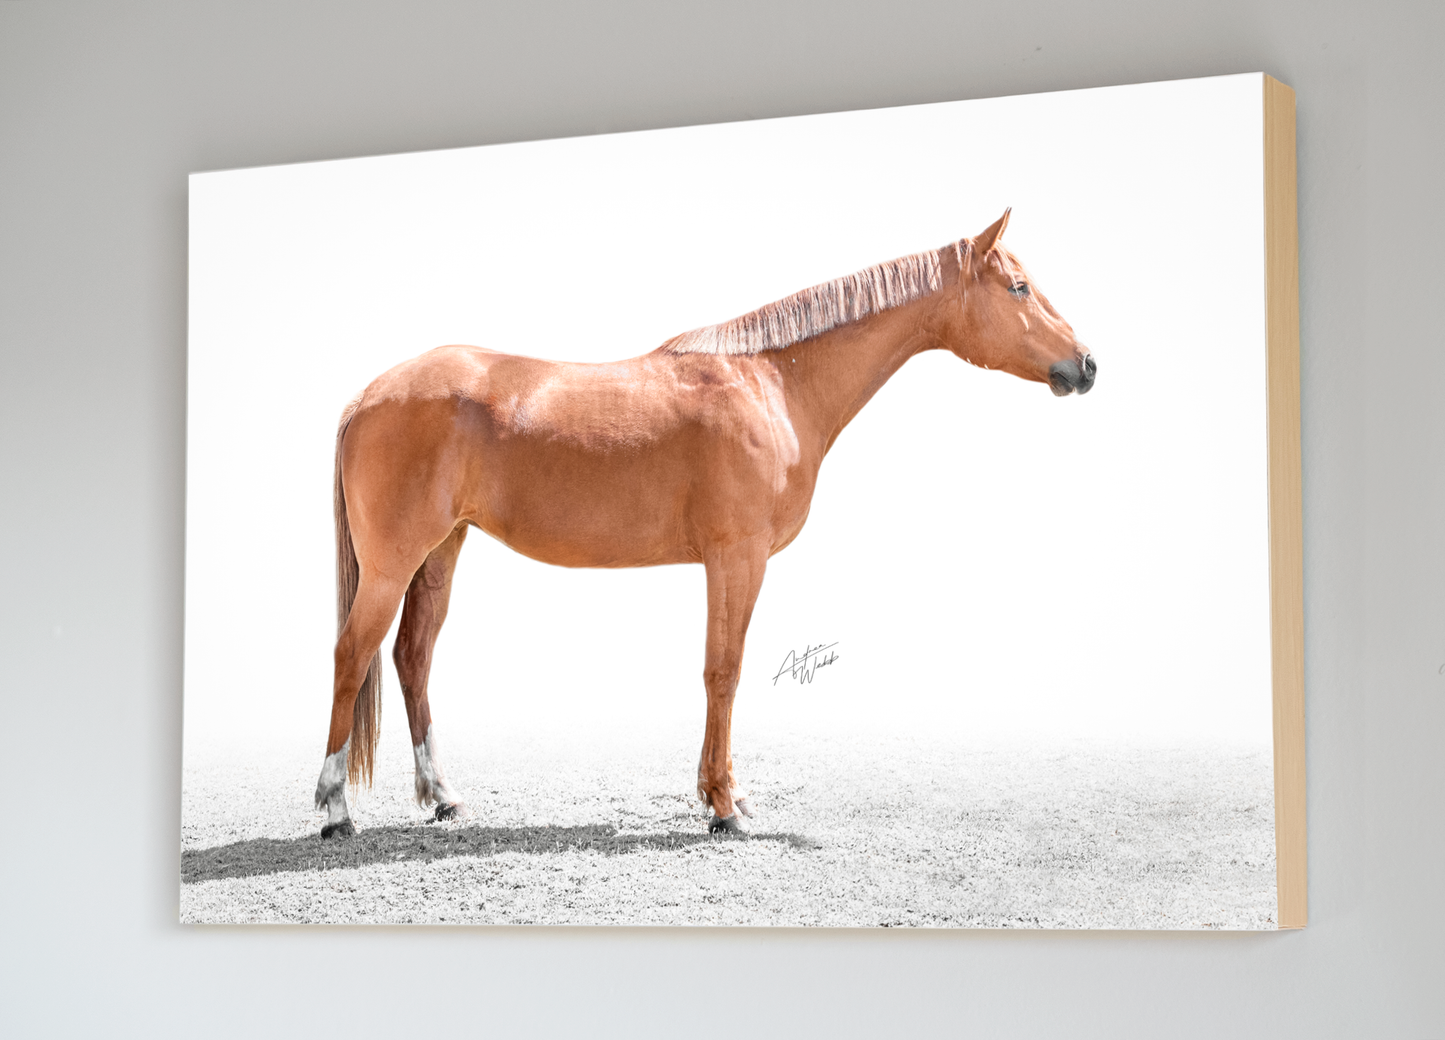 This portrait of a chestnut horse is on a white background. This horse has the classic American Quarter Horse and American Paint Horse build and conformation. The chestnut coat color with flaxen mane and tail makes this horse stand out from the rest. The Chestnut Horse on White Background print would be a great addition to any room with horse lovers or Western decor enthusiasts. Horse Portrait. Horse Prints. Horse Artwork. Animal Photography. Horse photography. Horse wall art.